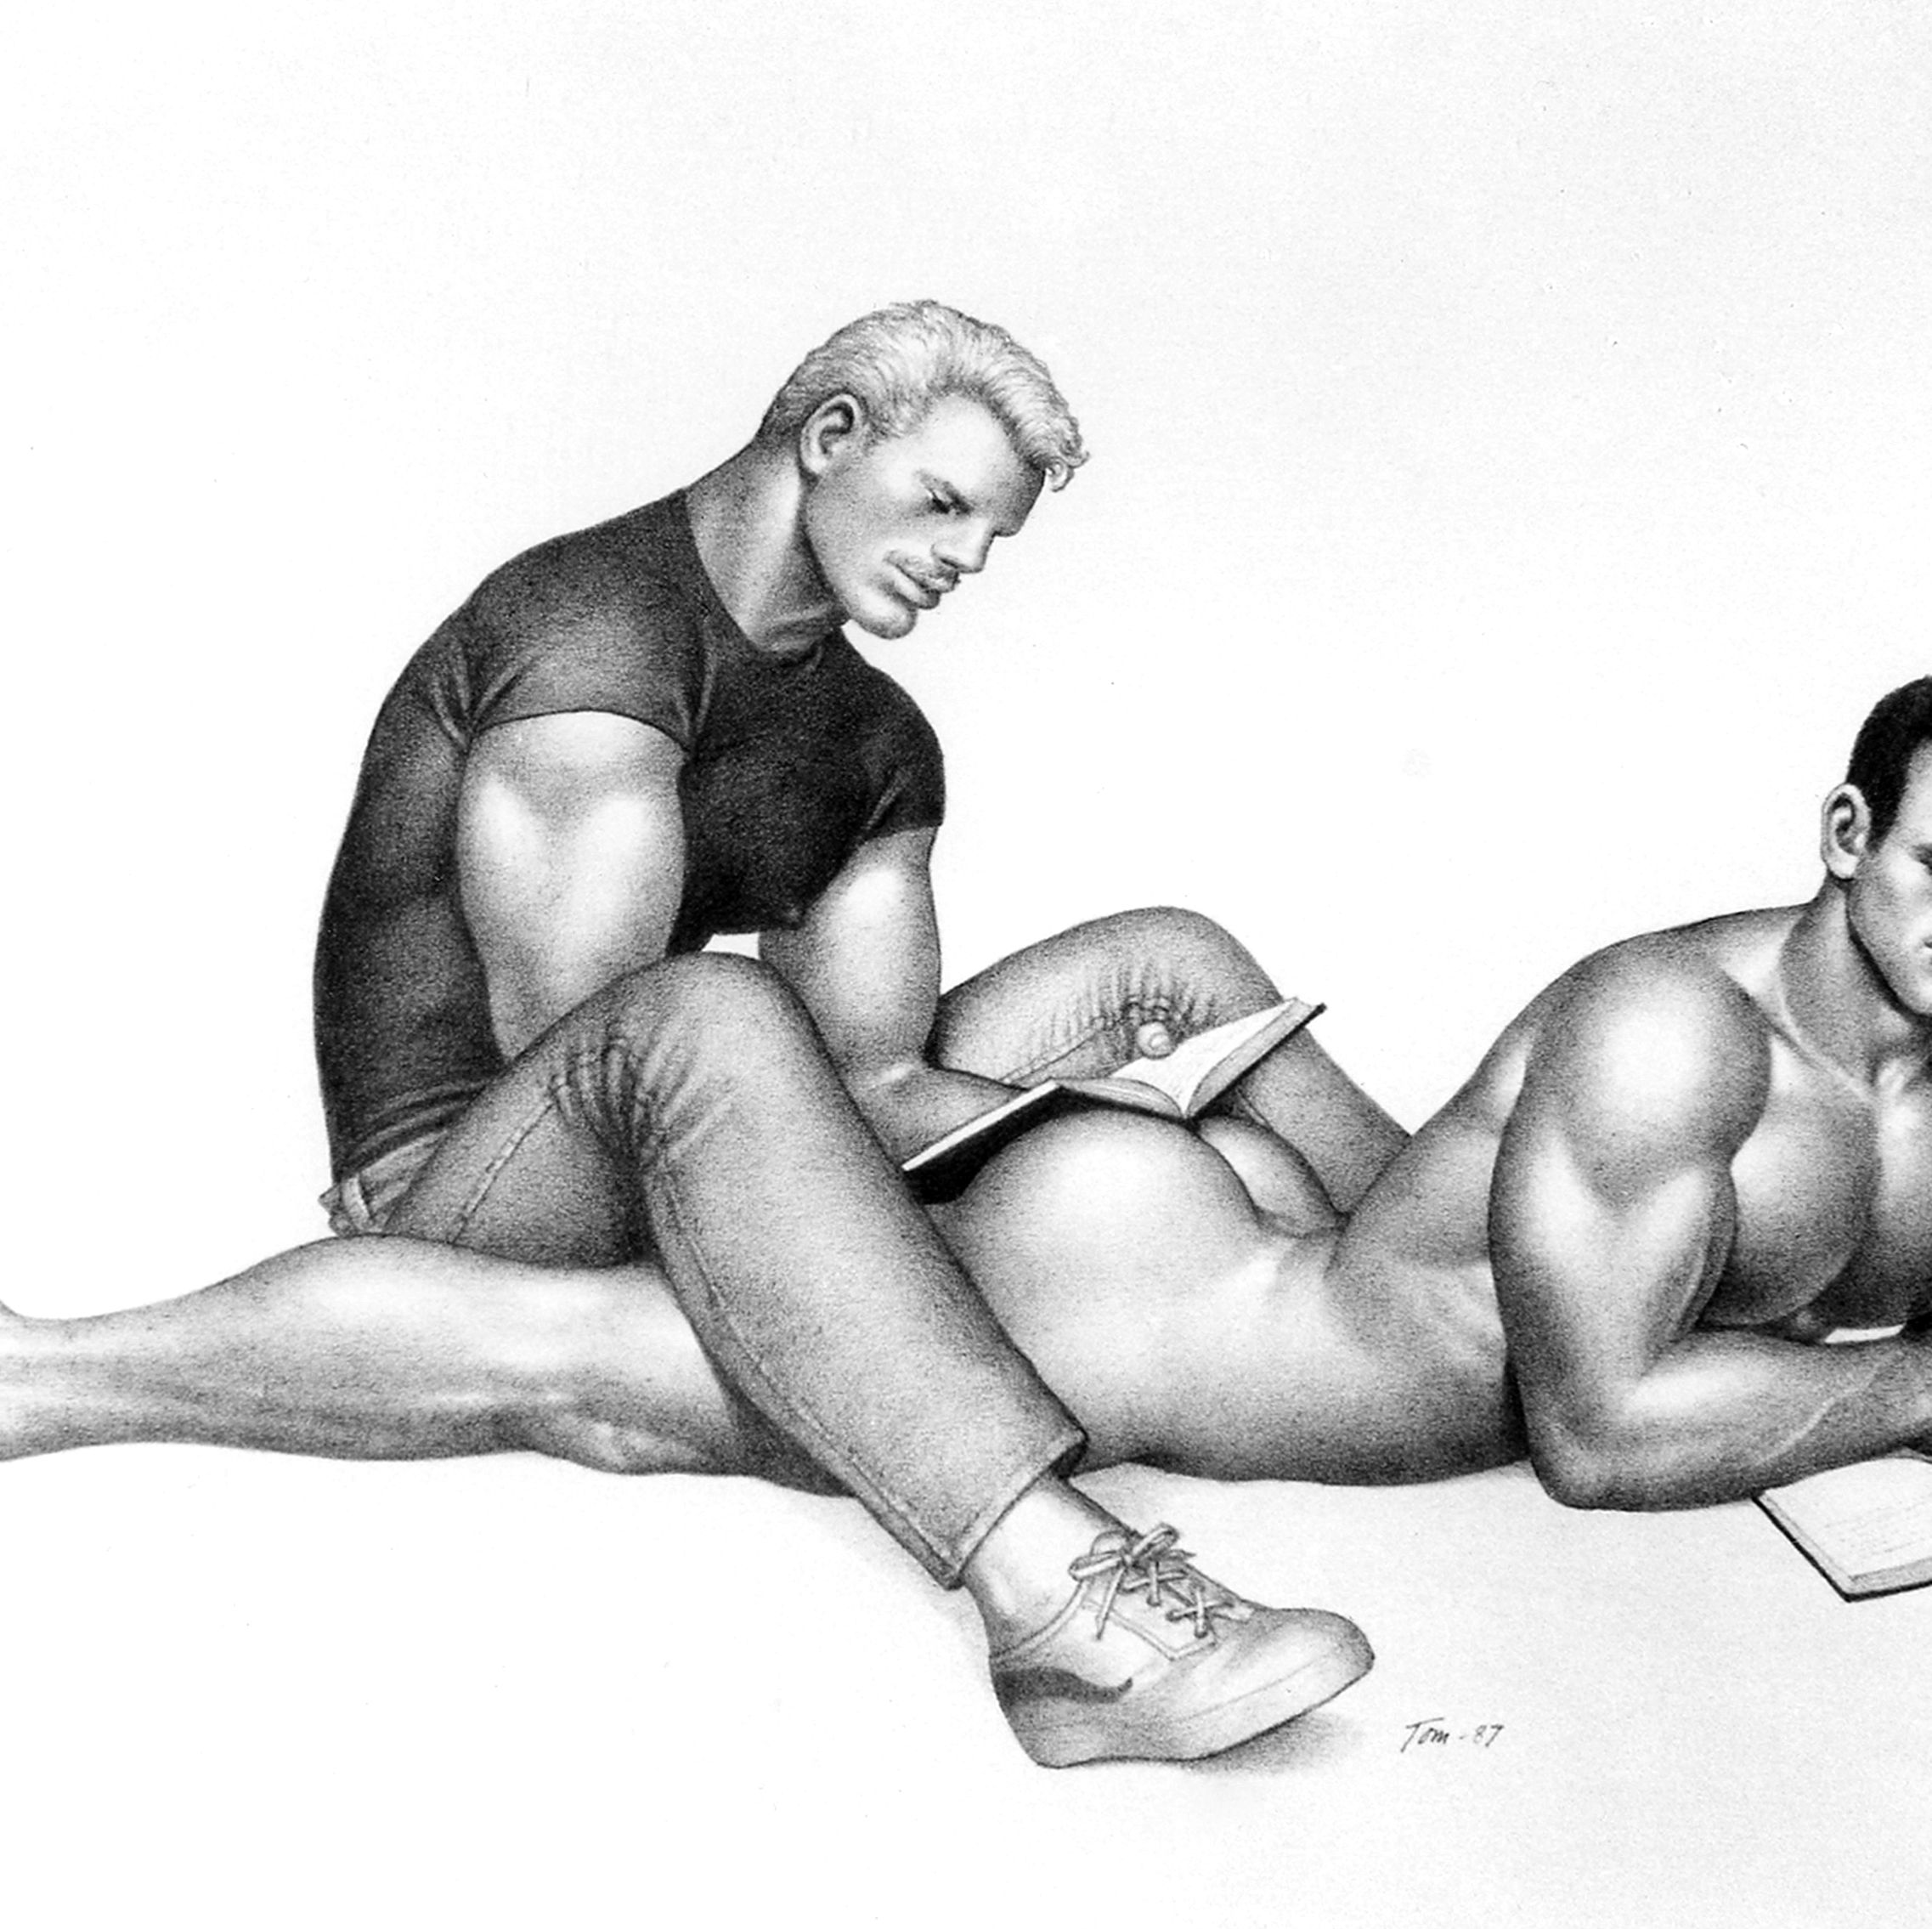 Nazi Gay Sex Drawing - There's A Gay Tom Of Finland Porno Stashed In Your Wardrobe